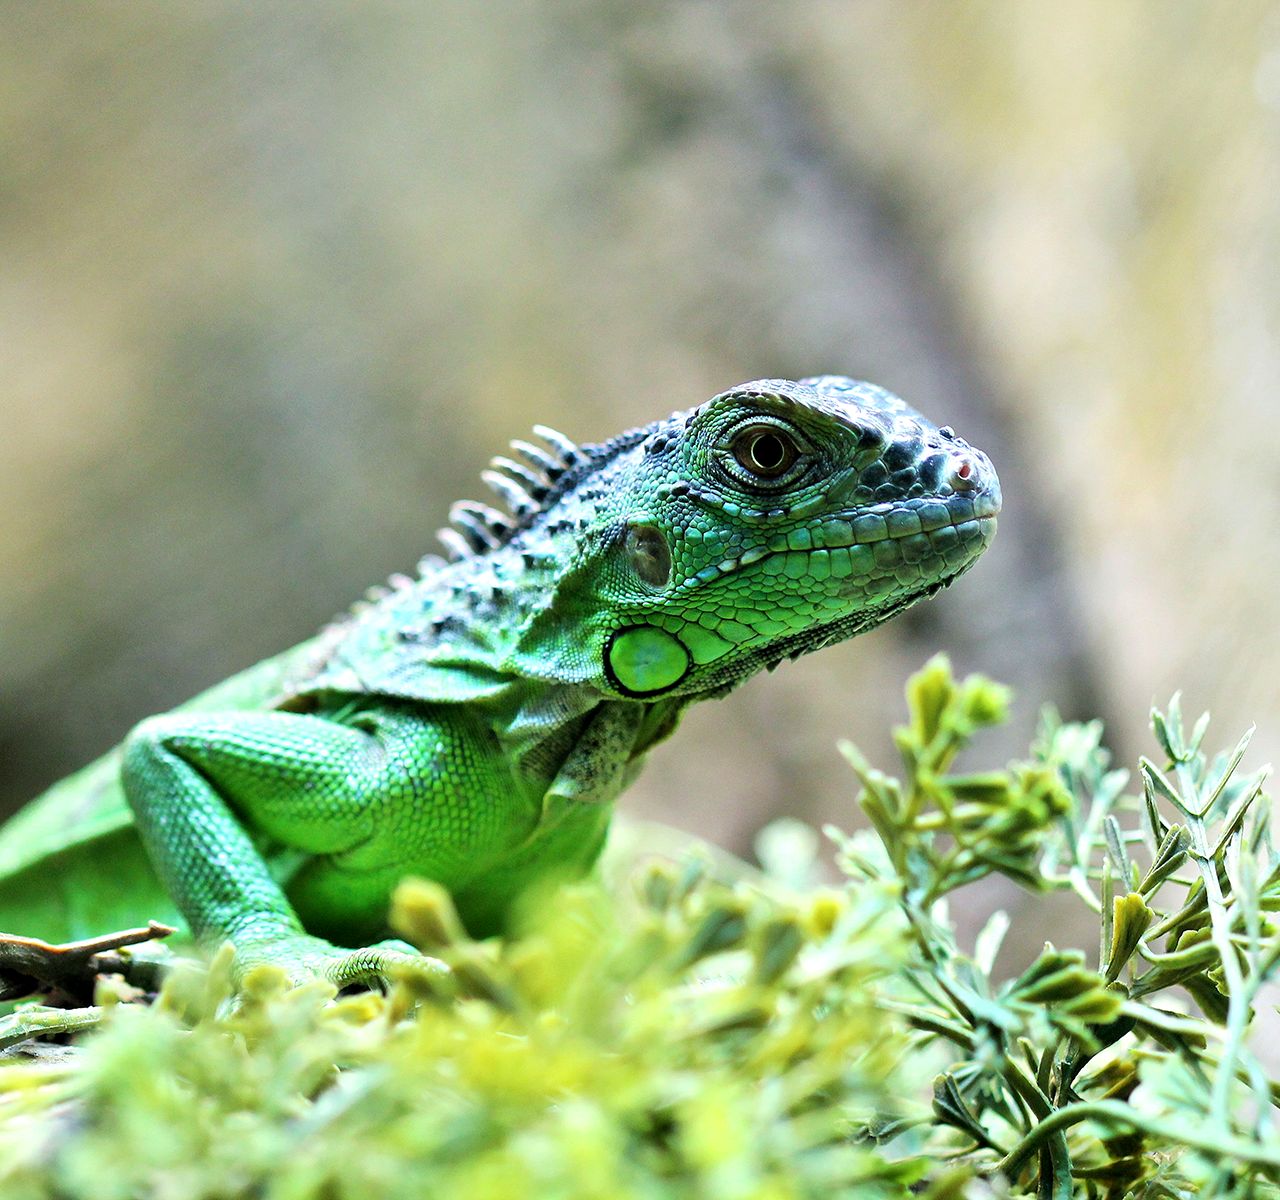 What Climate Does My Reptile Need?